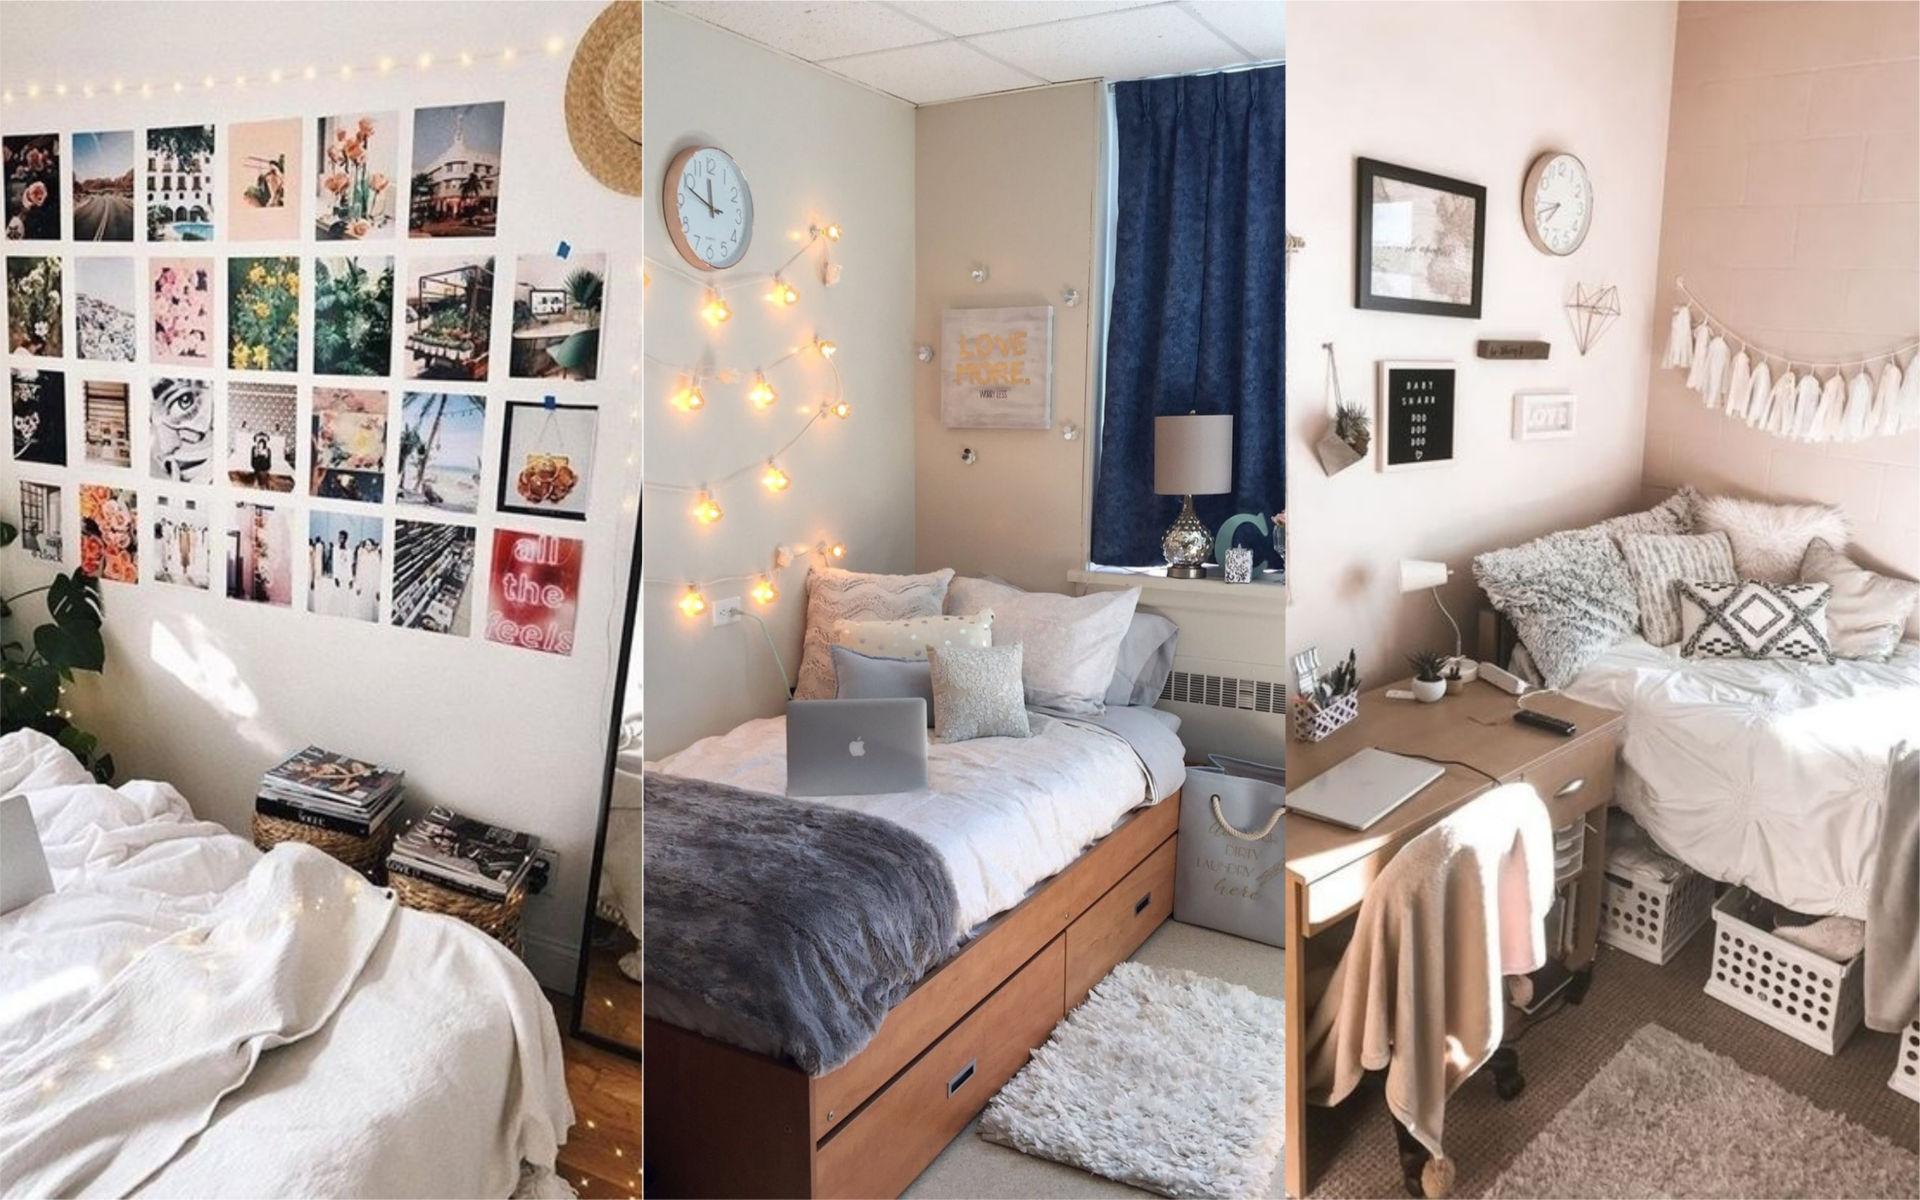 20 Genius Ways To Decorate Your University Room That We Re Obsessing Over Ideas The Curious Planner